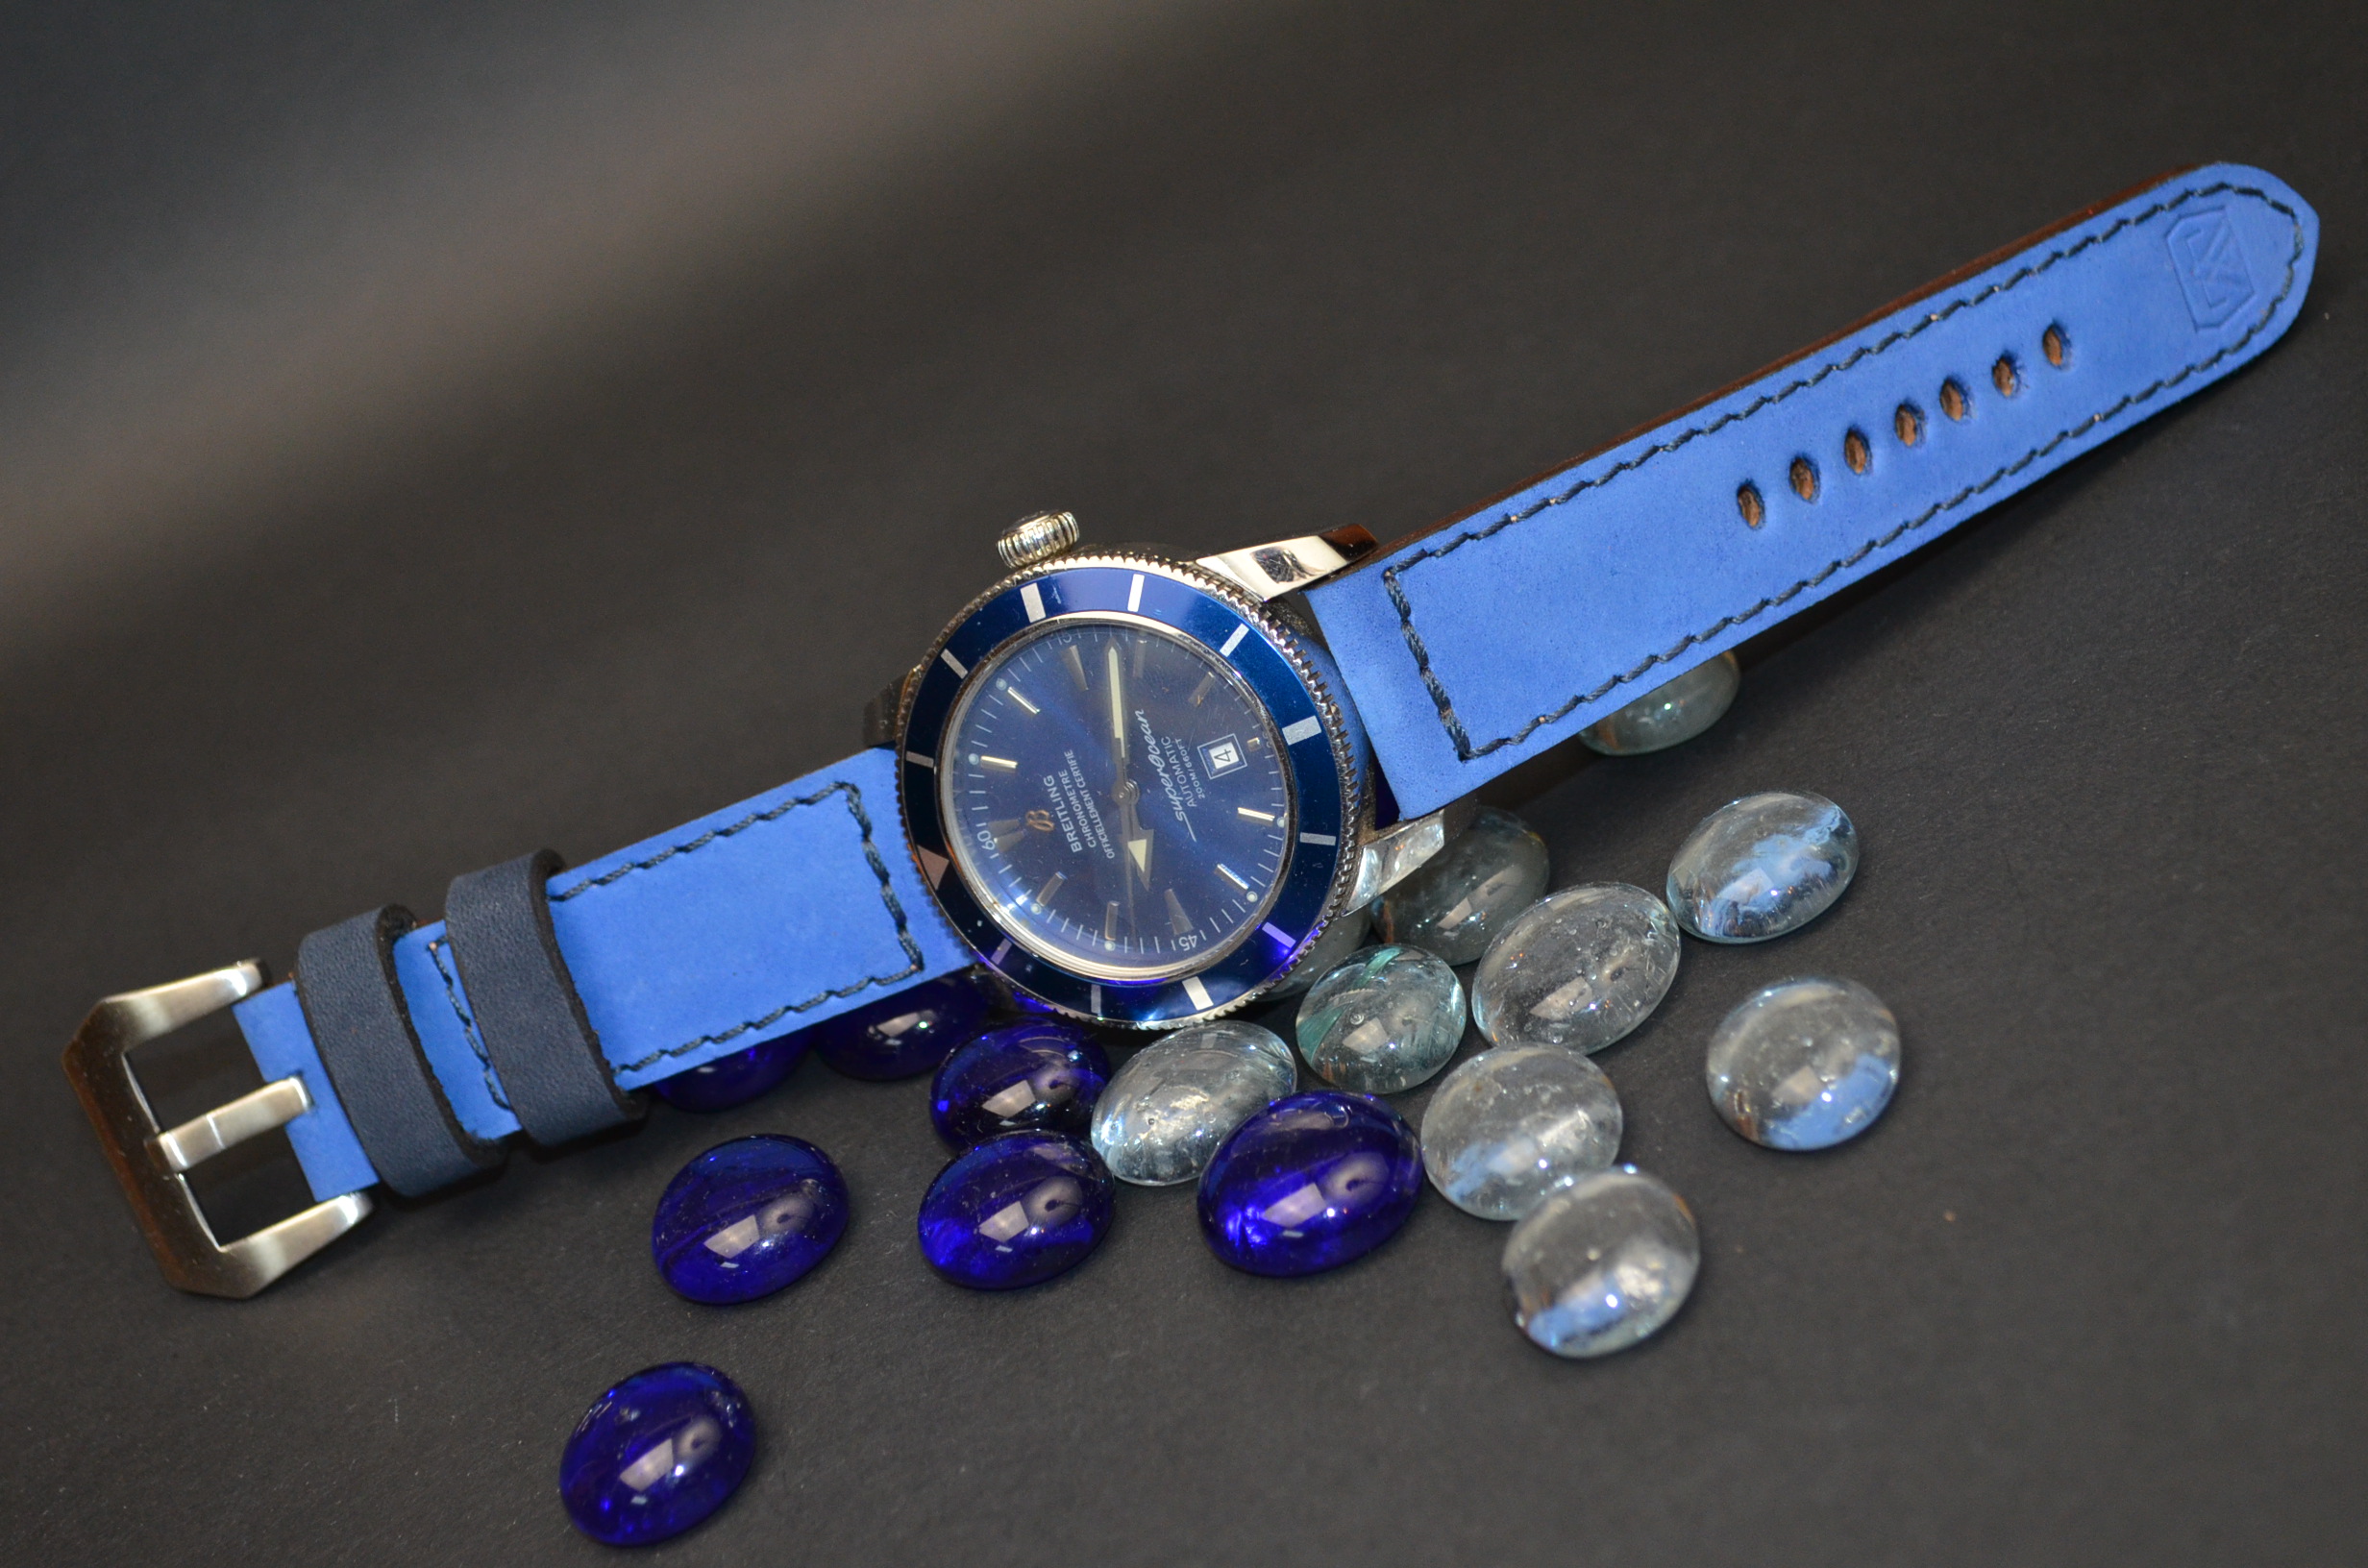 NAVY BLUE BLUE is one of our hand crafted watch straps. Available in navy blue blue color, 3.5 - 4 mm thick.